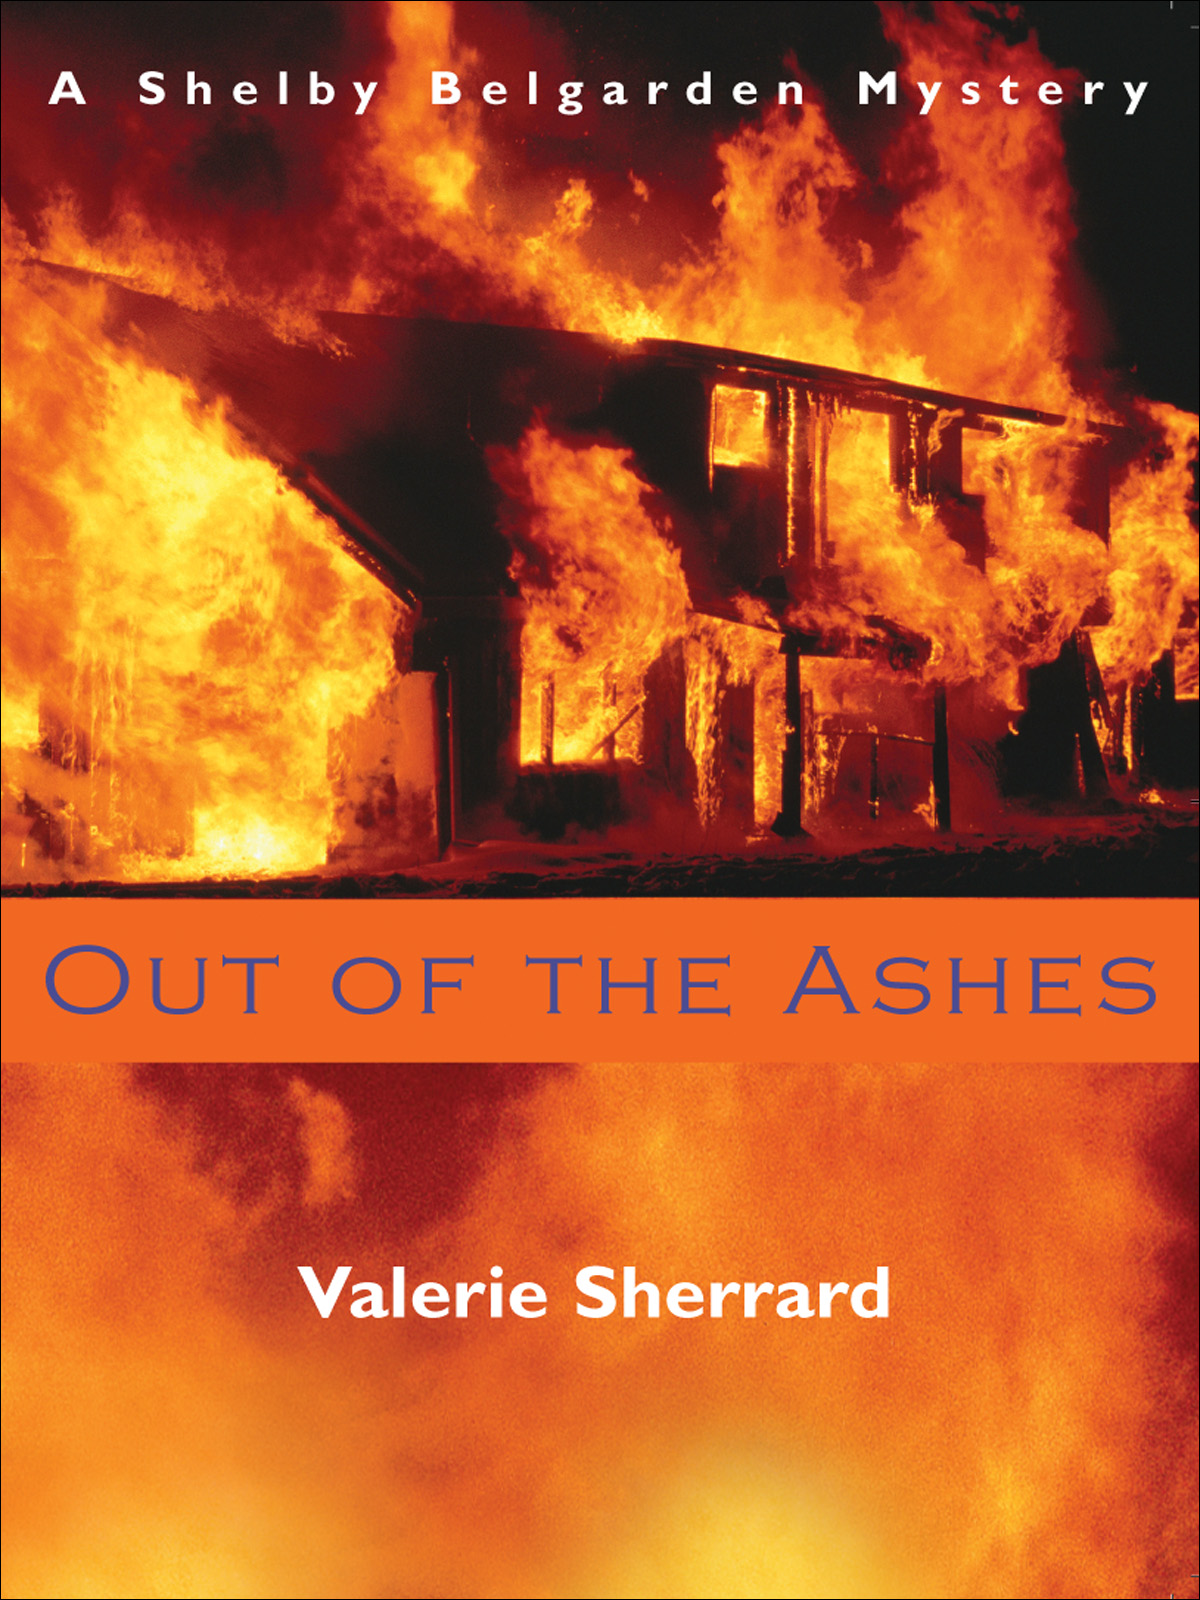 Out of the Ashes by Valerie Sherrard